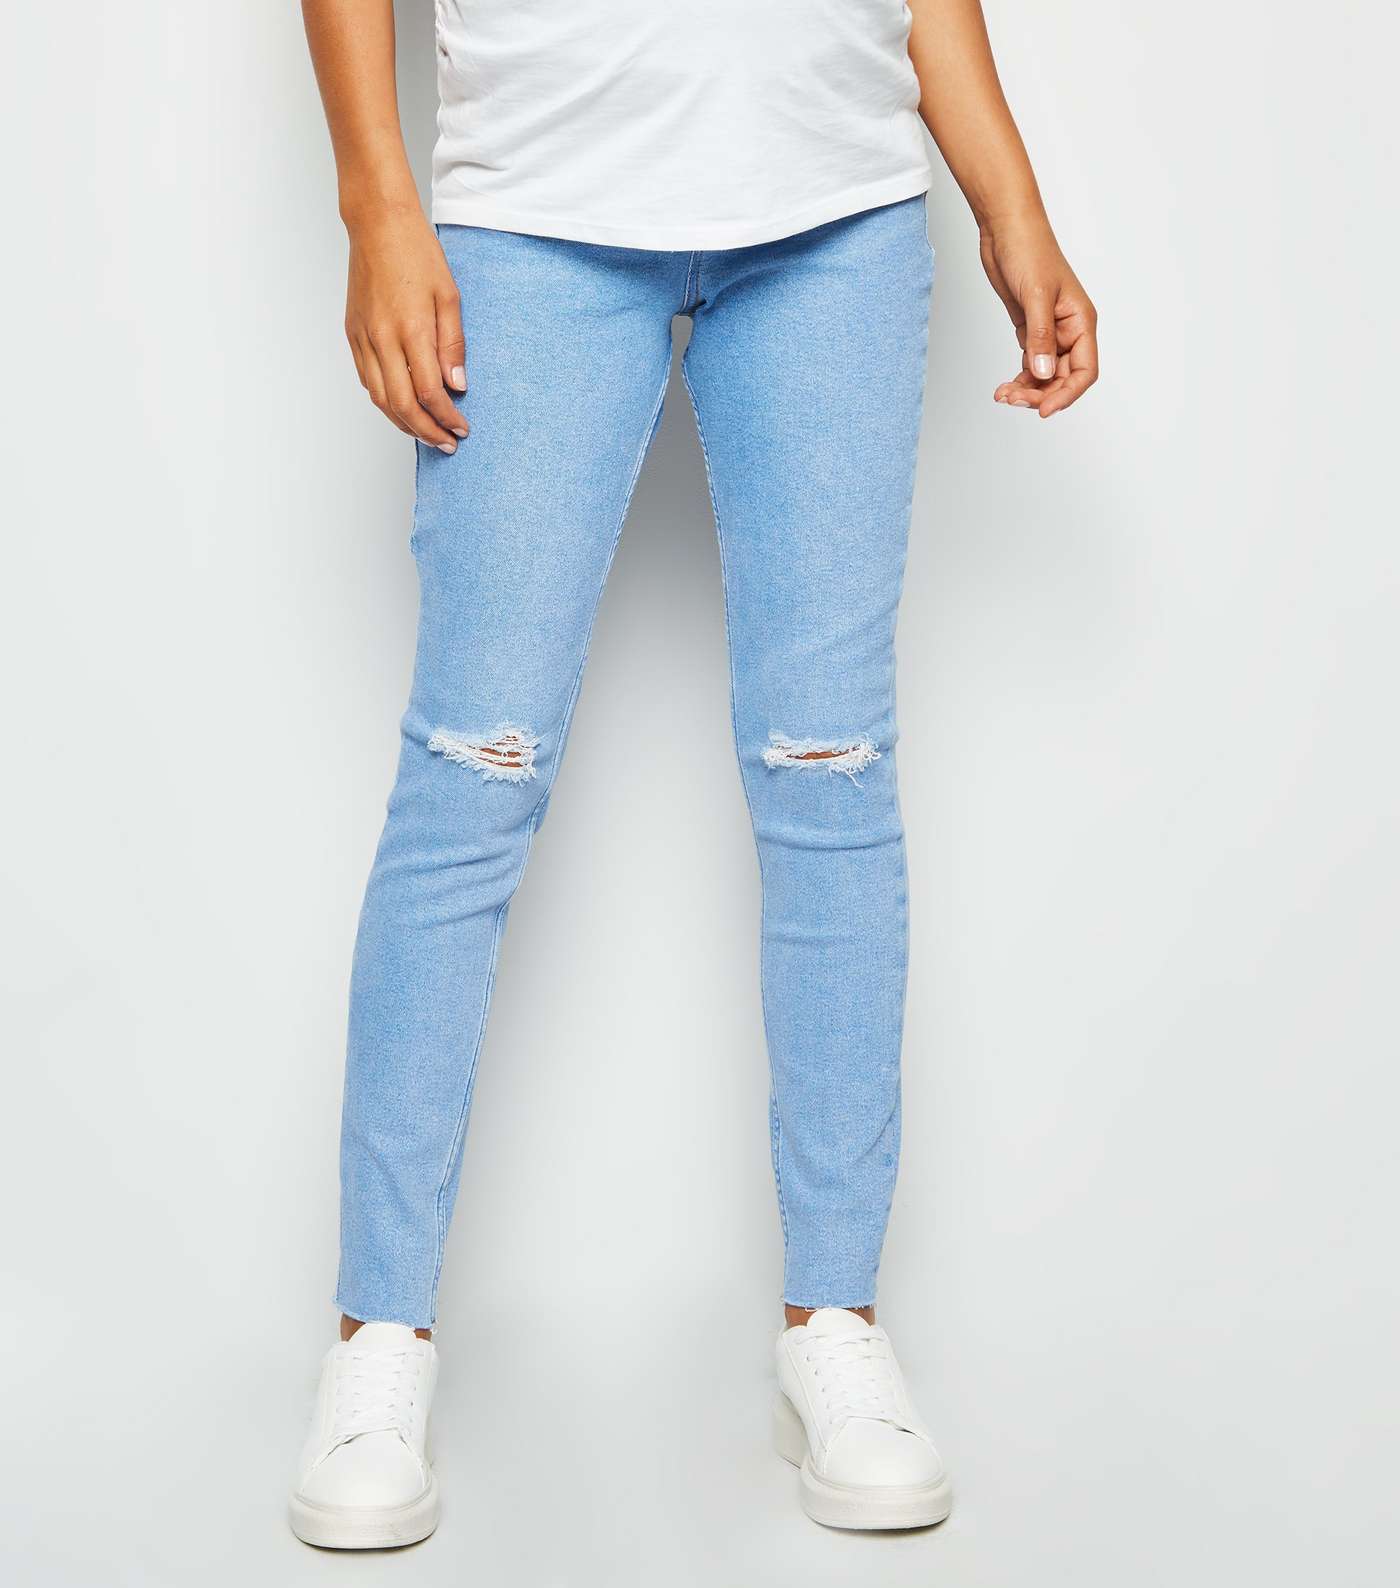 Maternity Pale Blue Ripped Knee Over Bump Jeans  Image 2